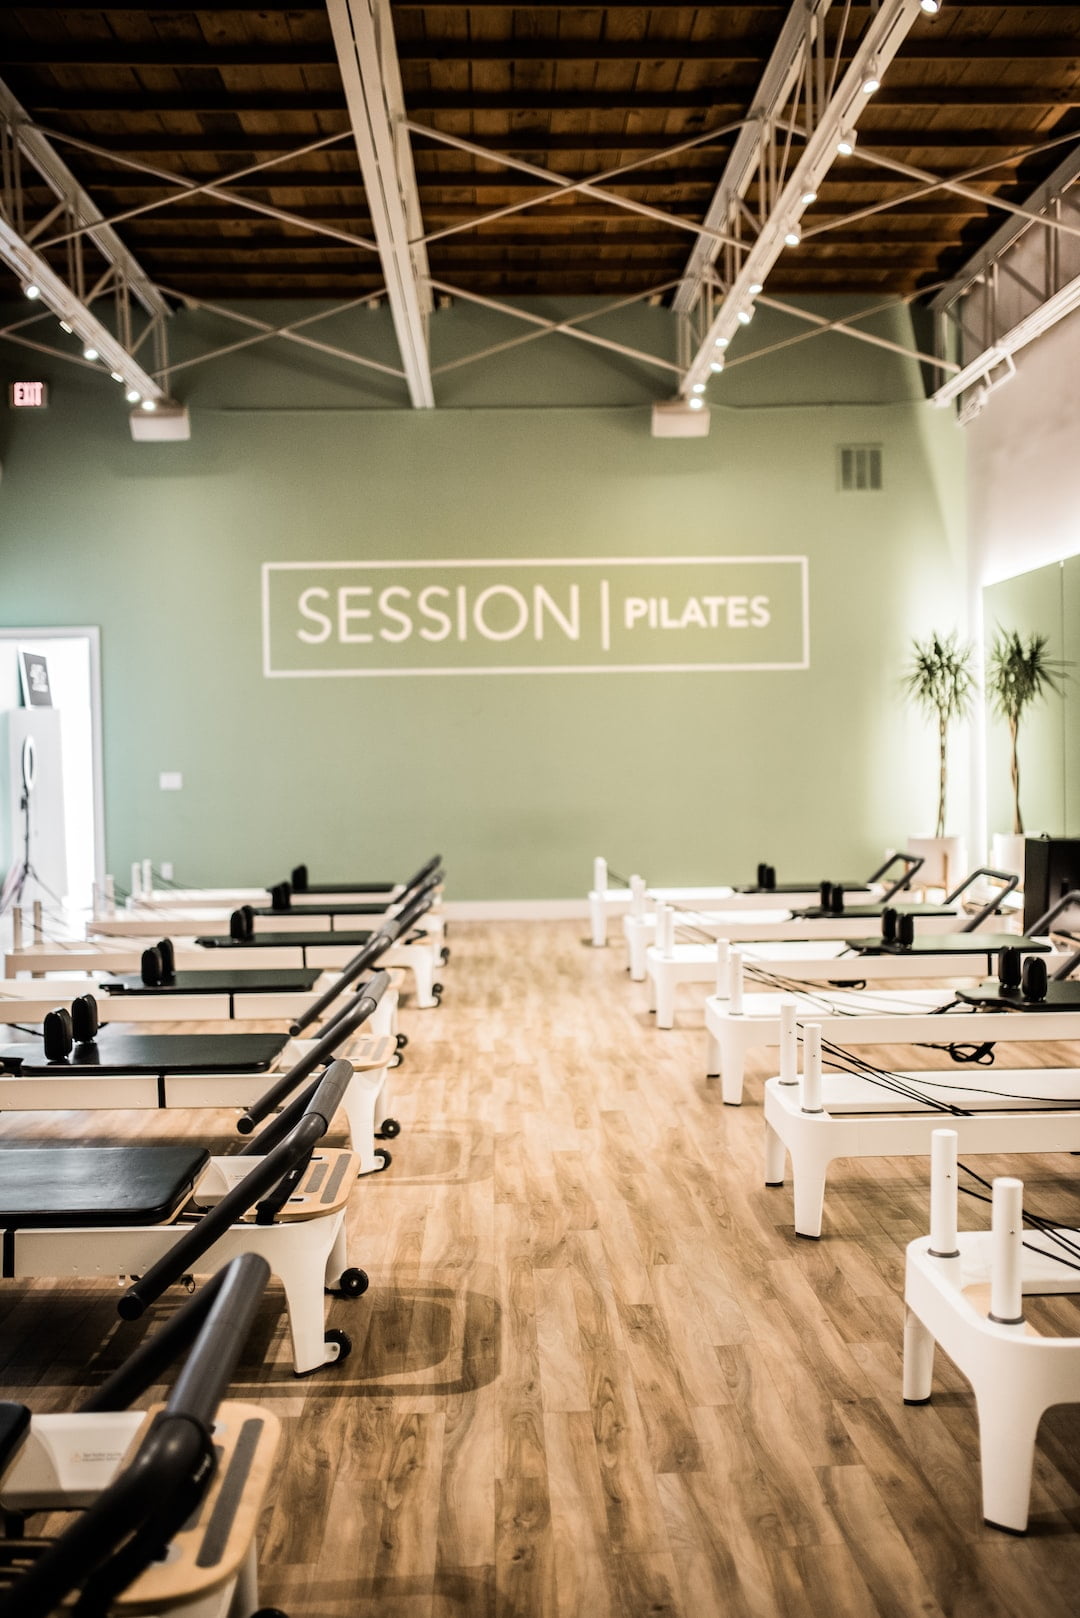 Pilates is a whole-body workout that can help strengthen your body while increasing your flexibility. Here's everything you need to know.